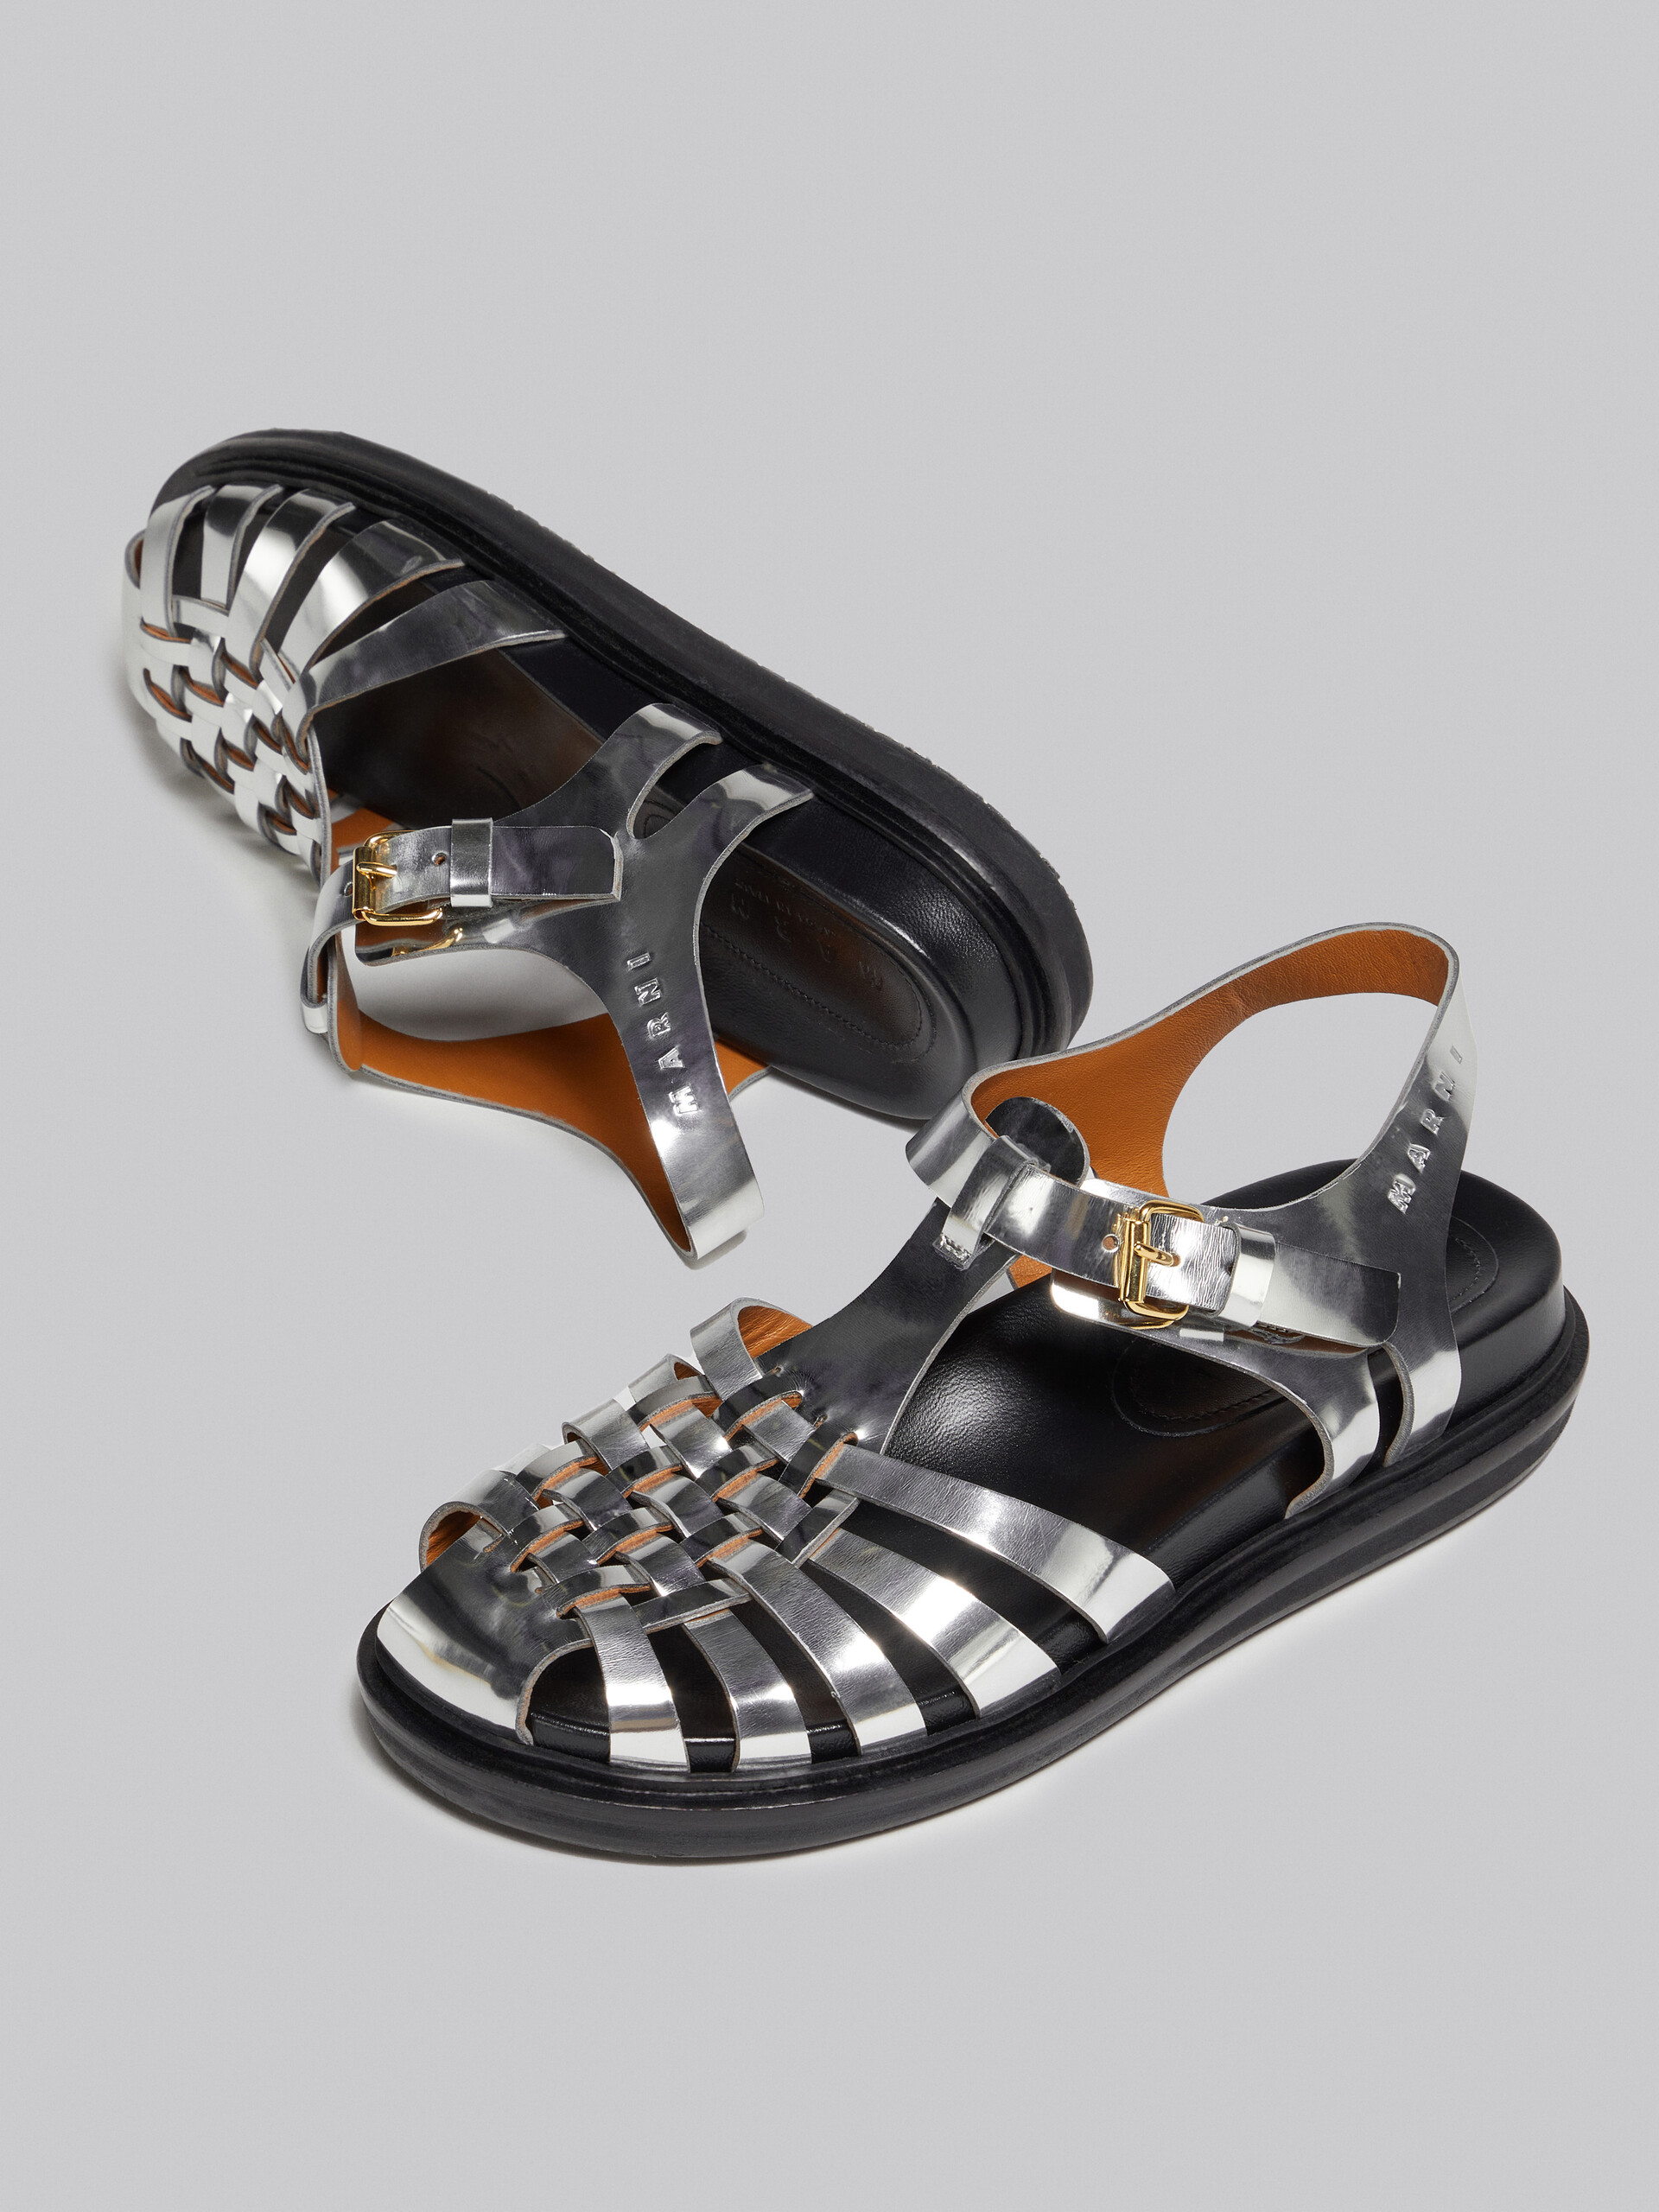 Silver mirrored leather fisherman's sandal - Sandals - Image 5